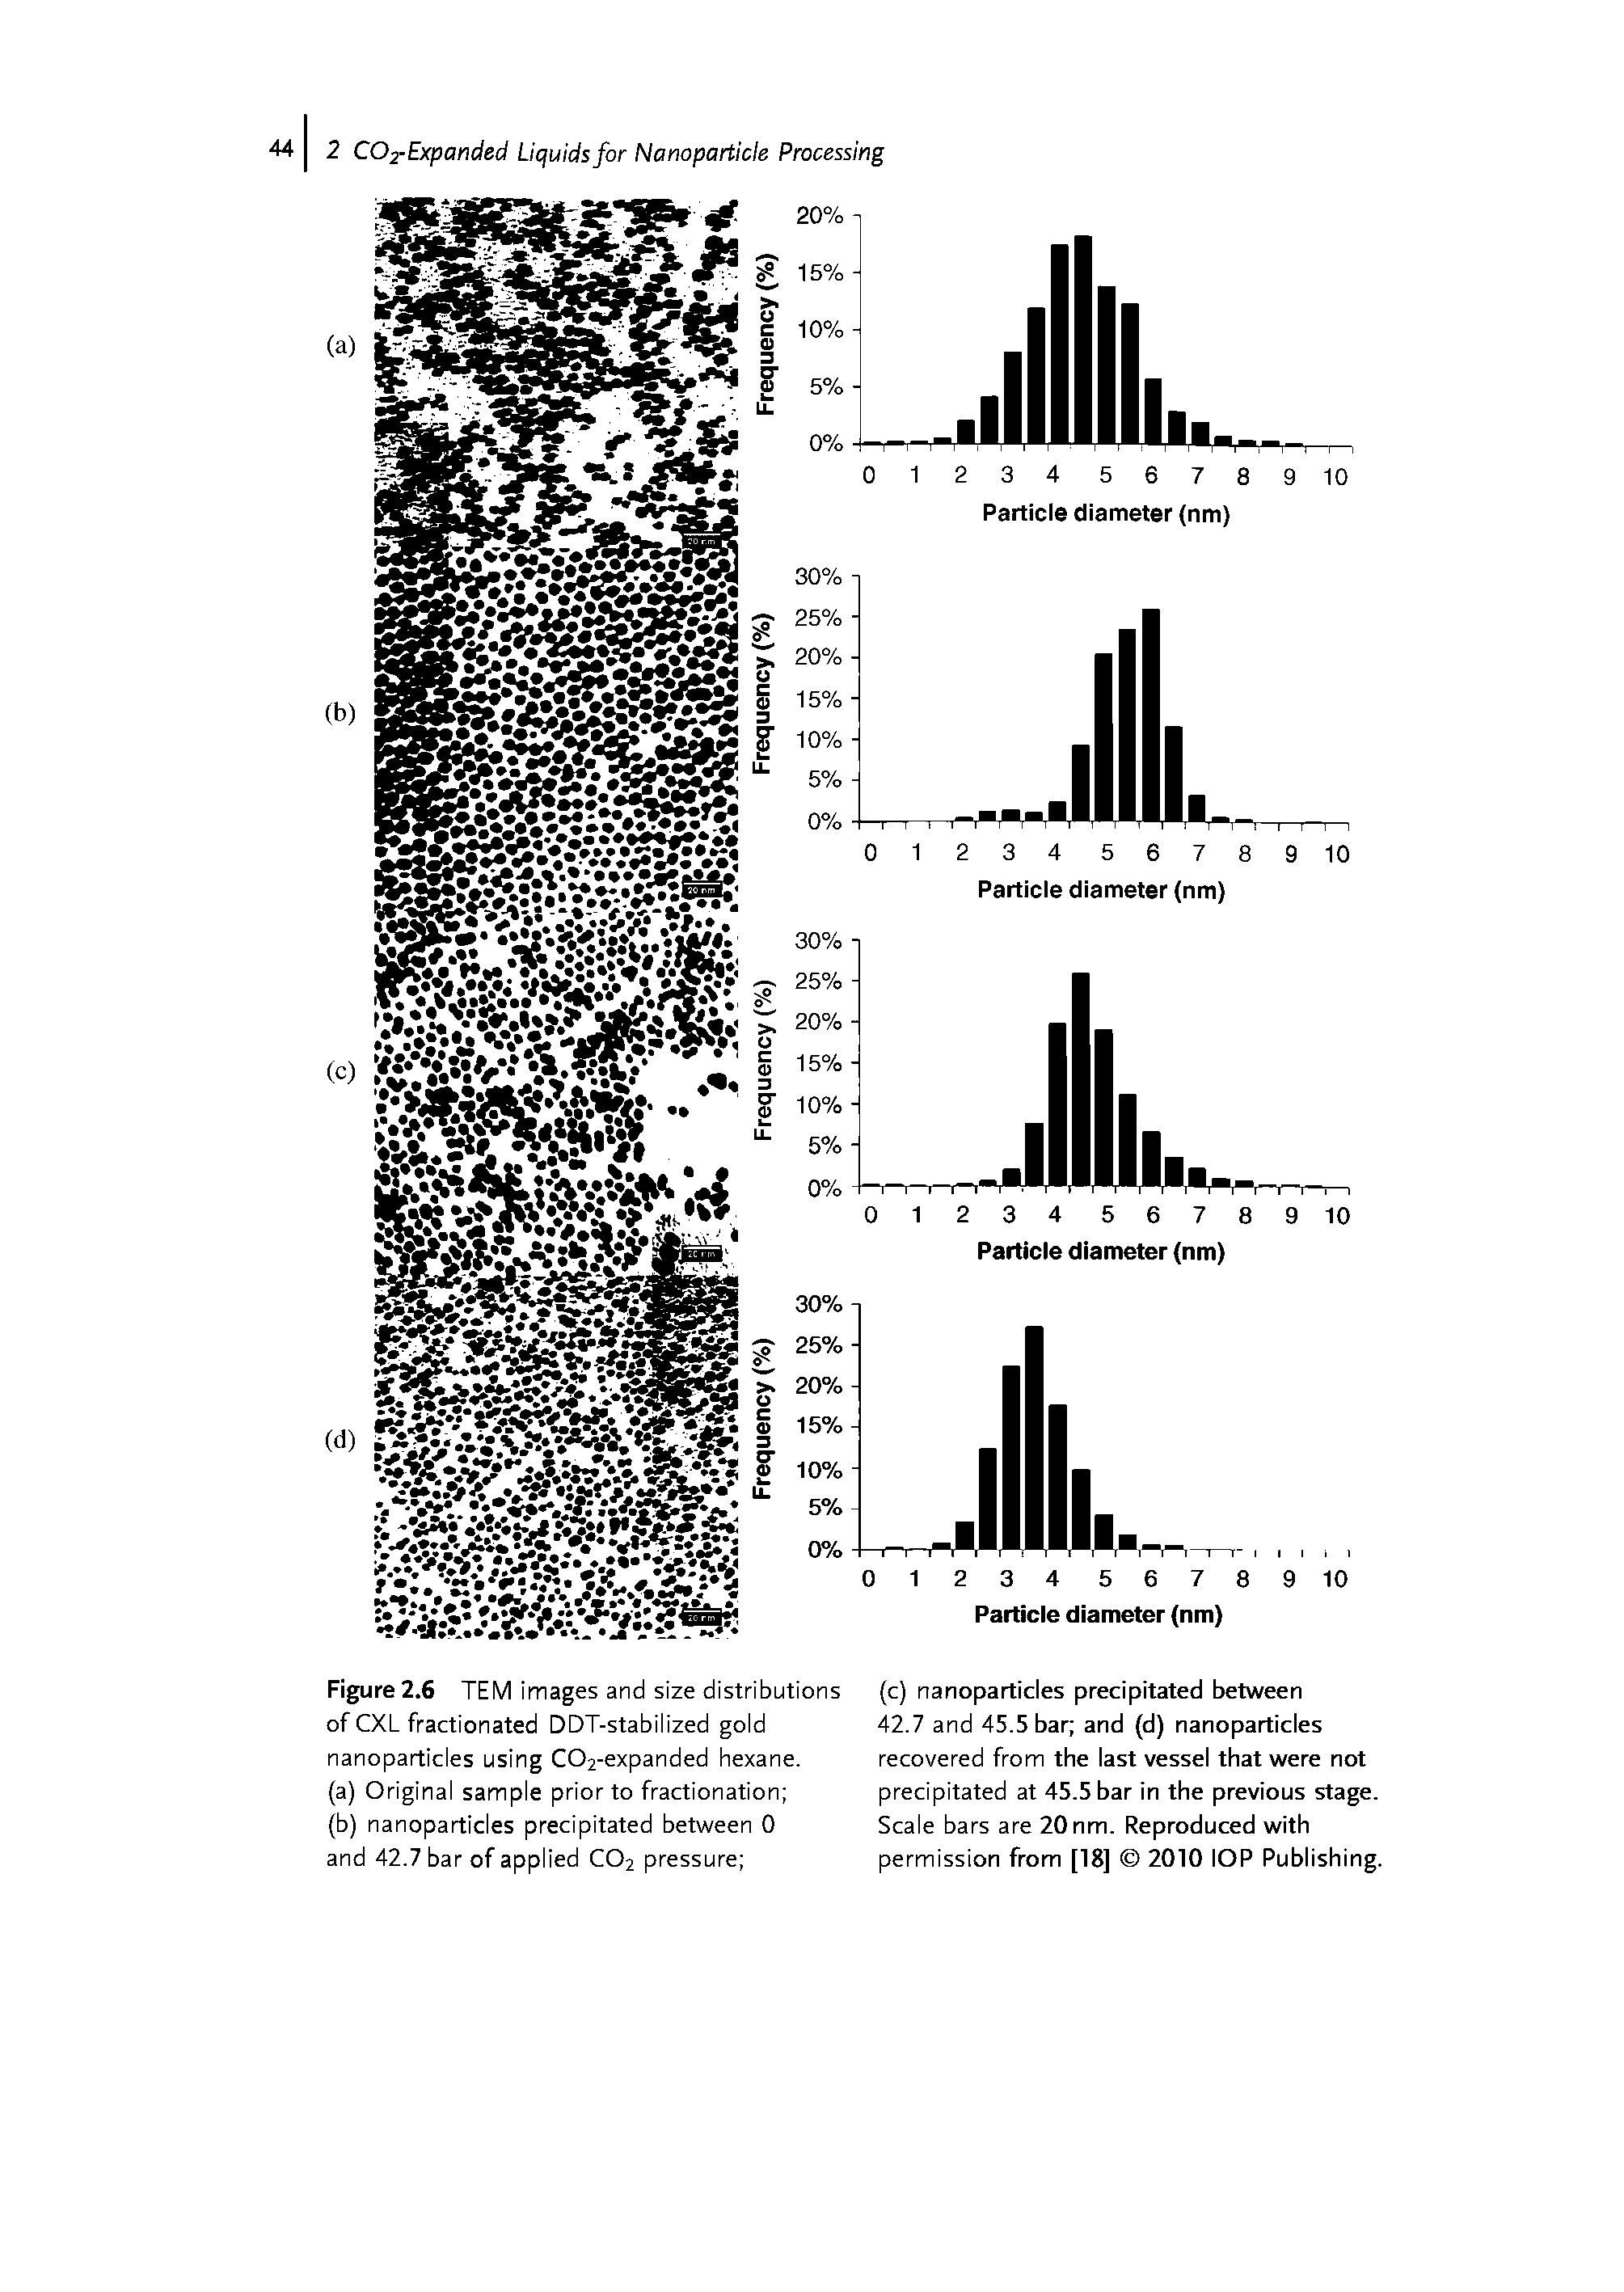 Figure 2.6 TEM images and size distributions of CXL fractionated DDT-stabilized gold nanoparticles using C02-expanded hexane.